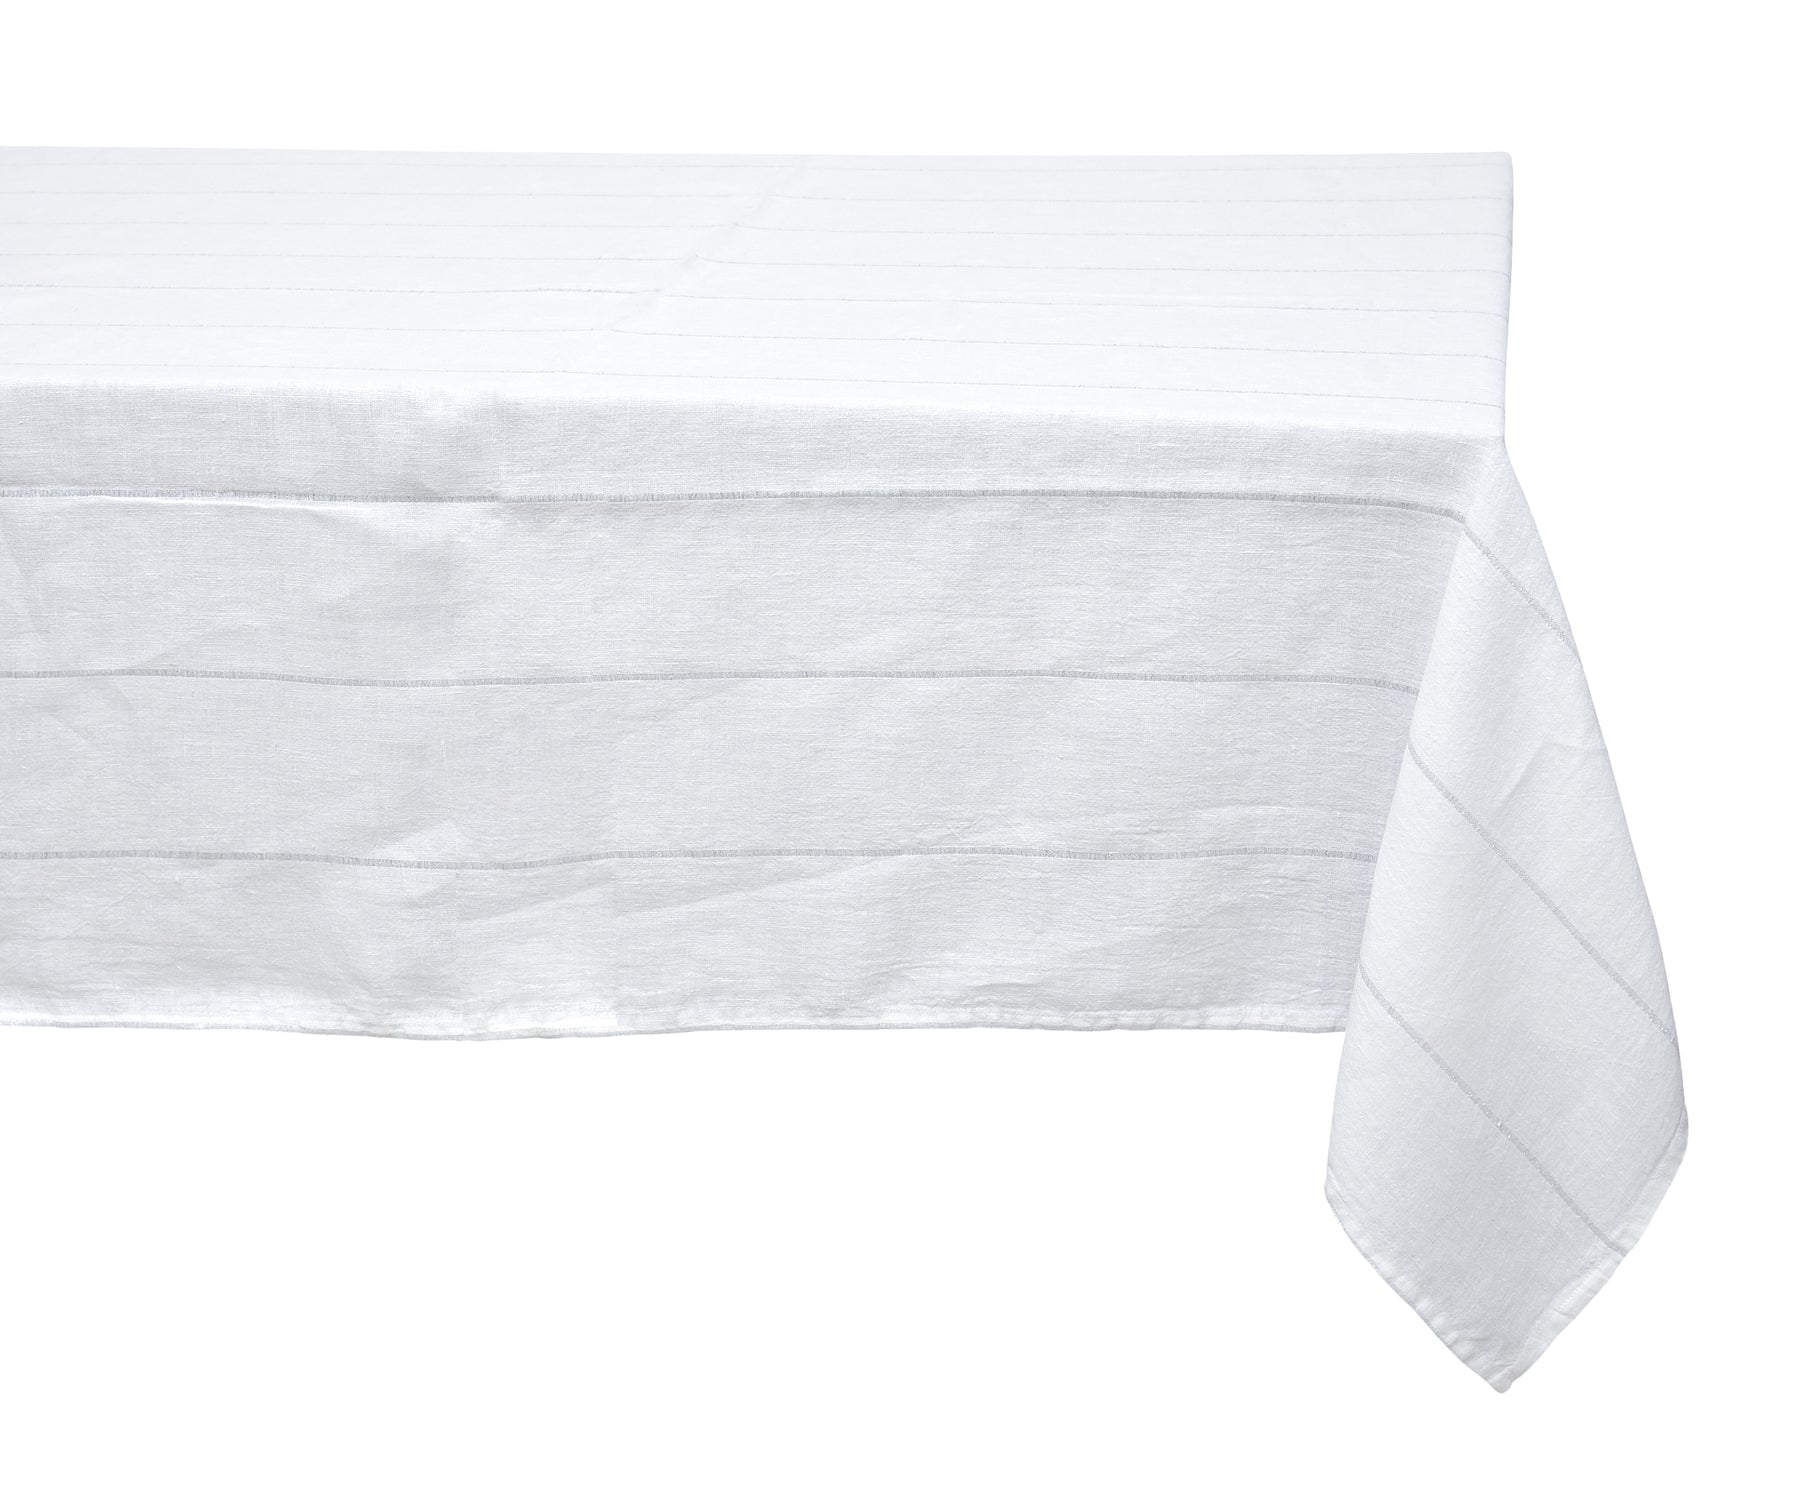 The linen tablecloth is a versatile and stylish choice for various occasions. Crafted from high-quality linen fabric, it offers a combination of elegance, durability, and natural beauty.